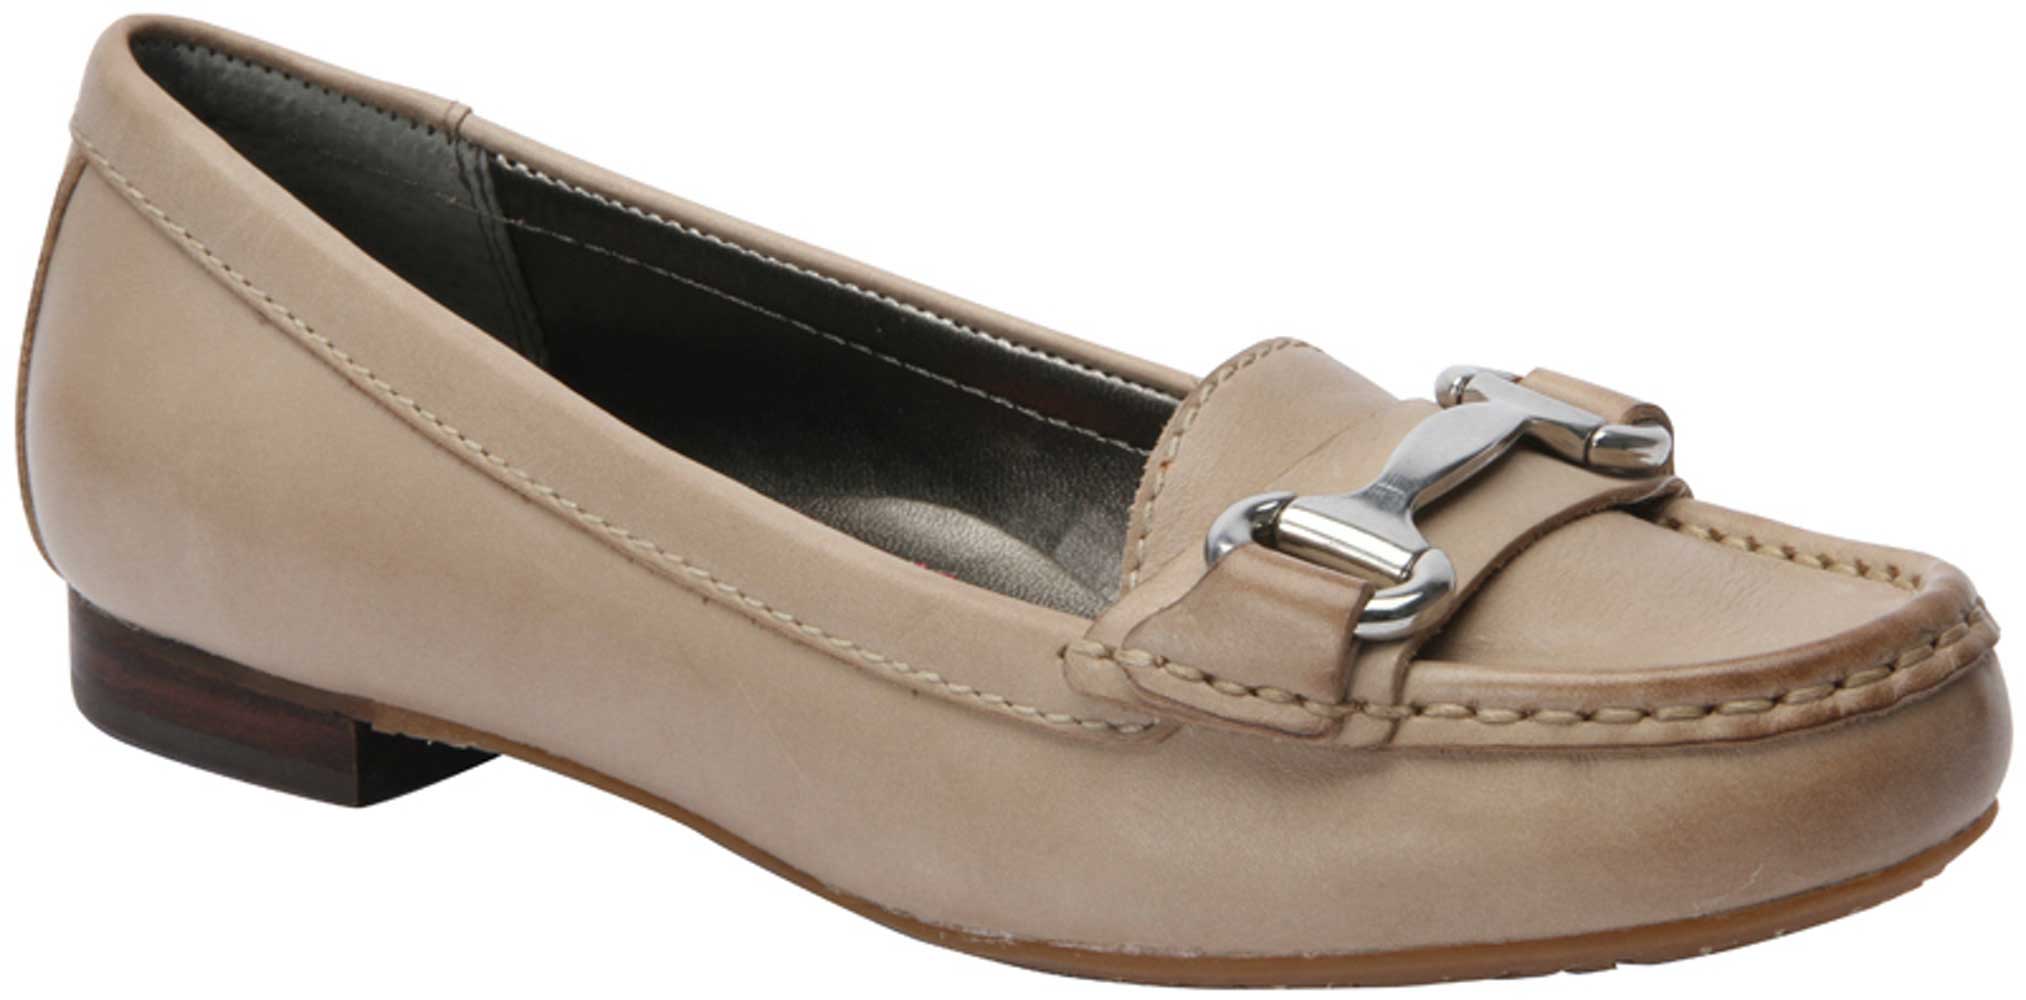 The Ros Hommerson Regina 62010 Slip on Casual Comfort Shoe